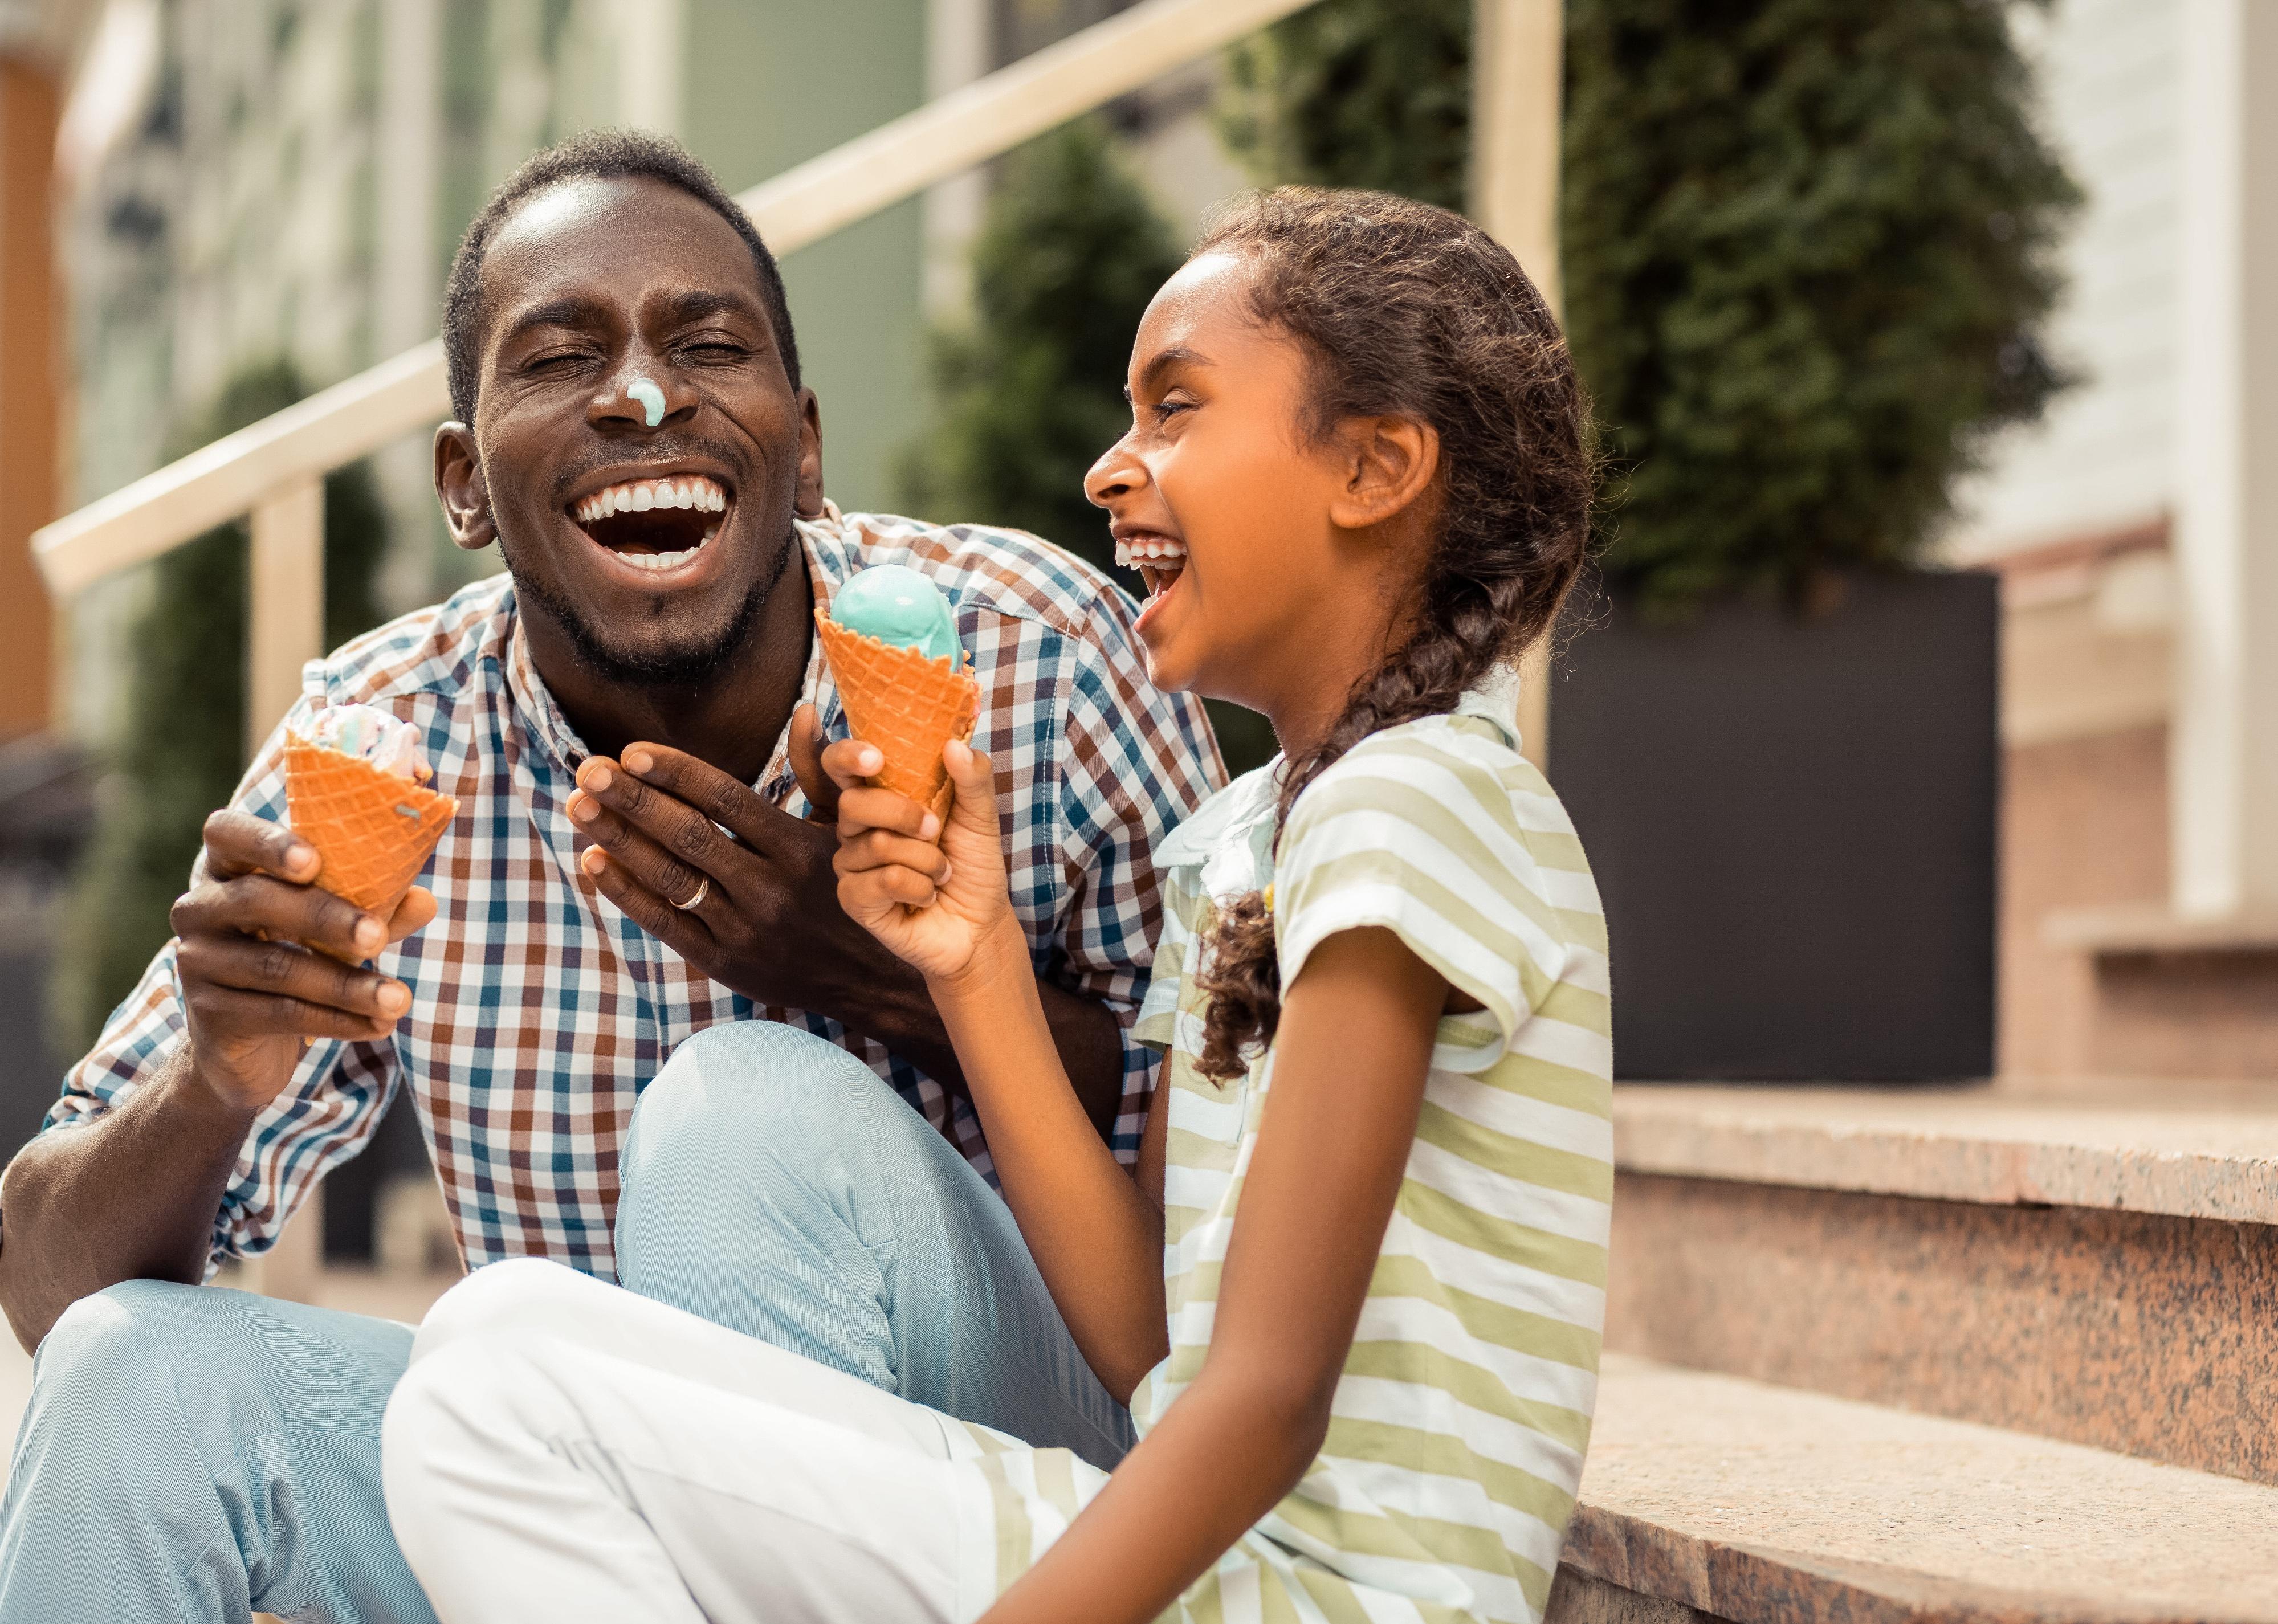 Young man and little girl laughing with ice cream.